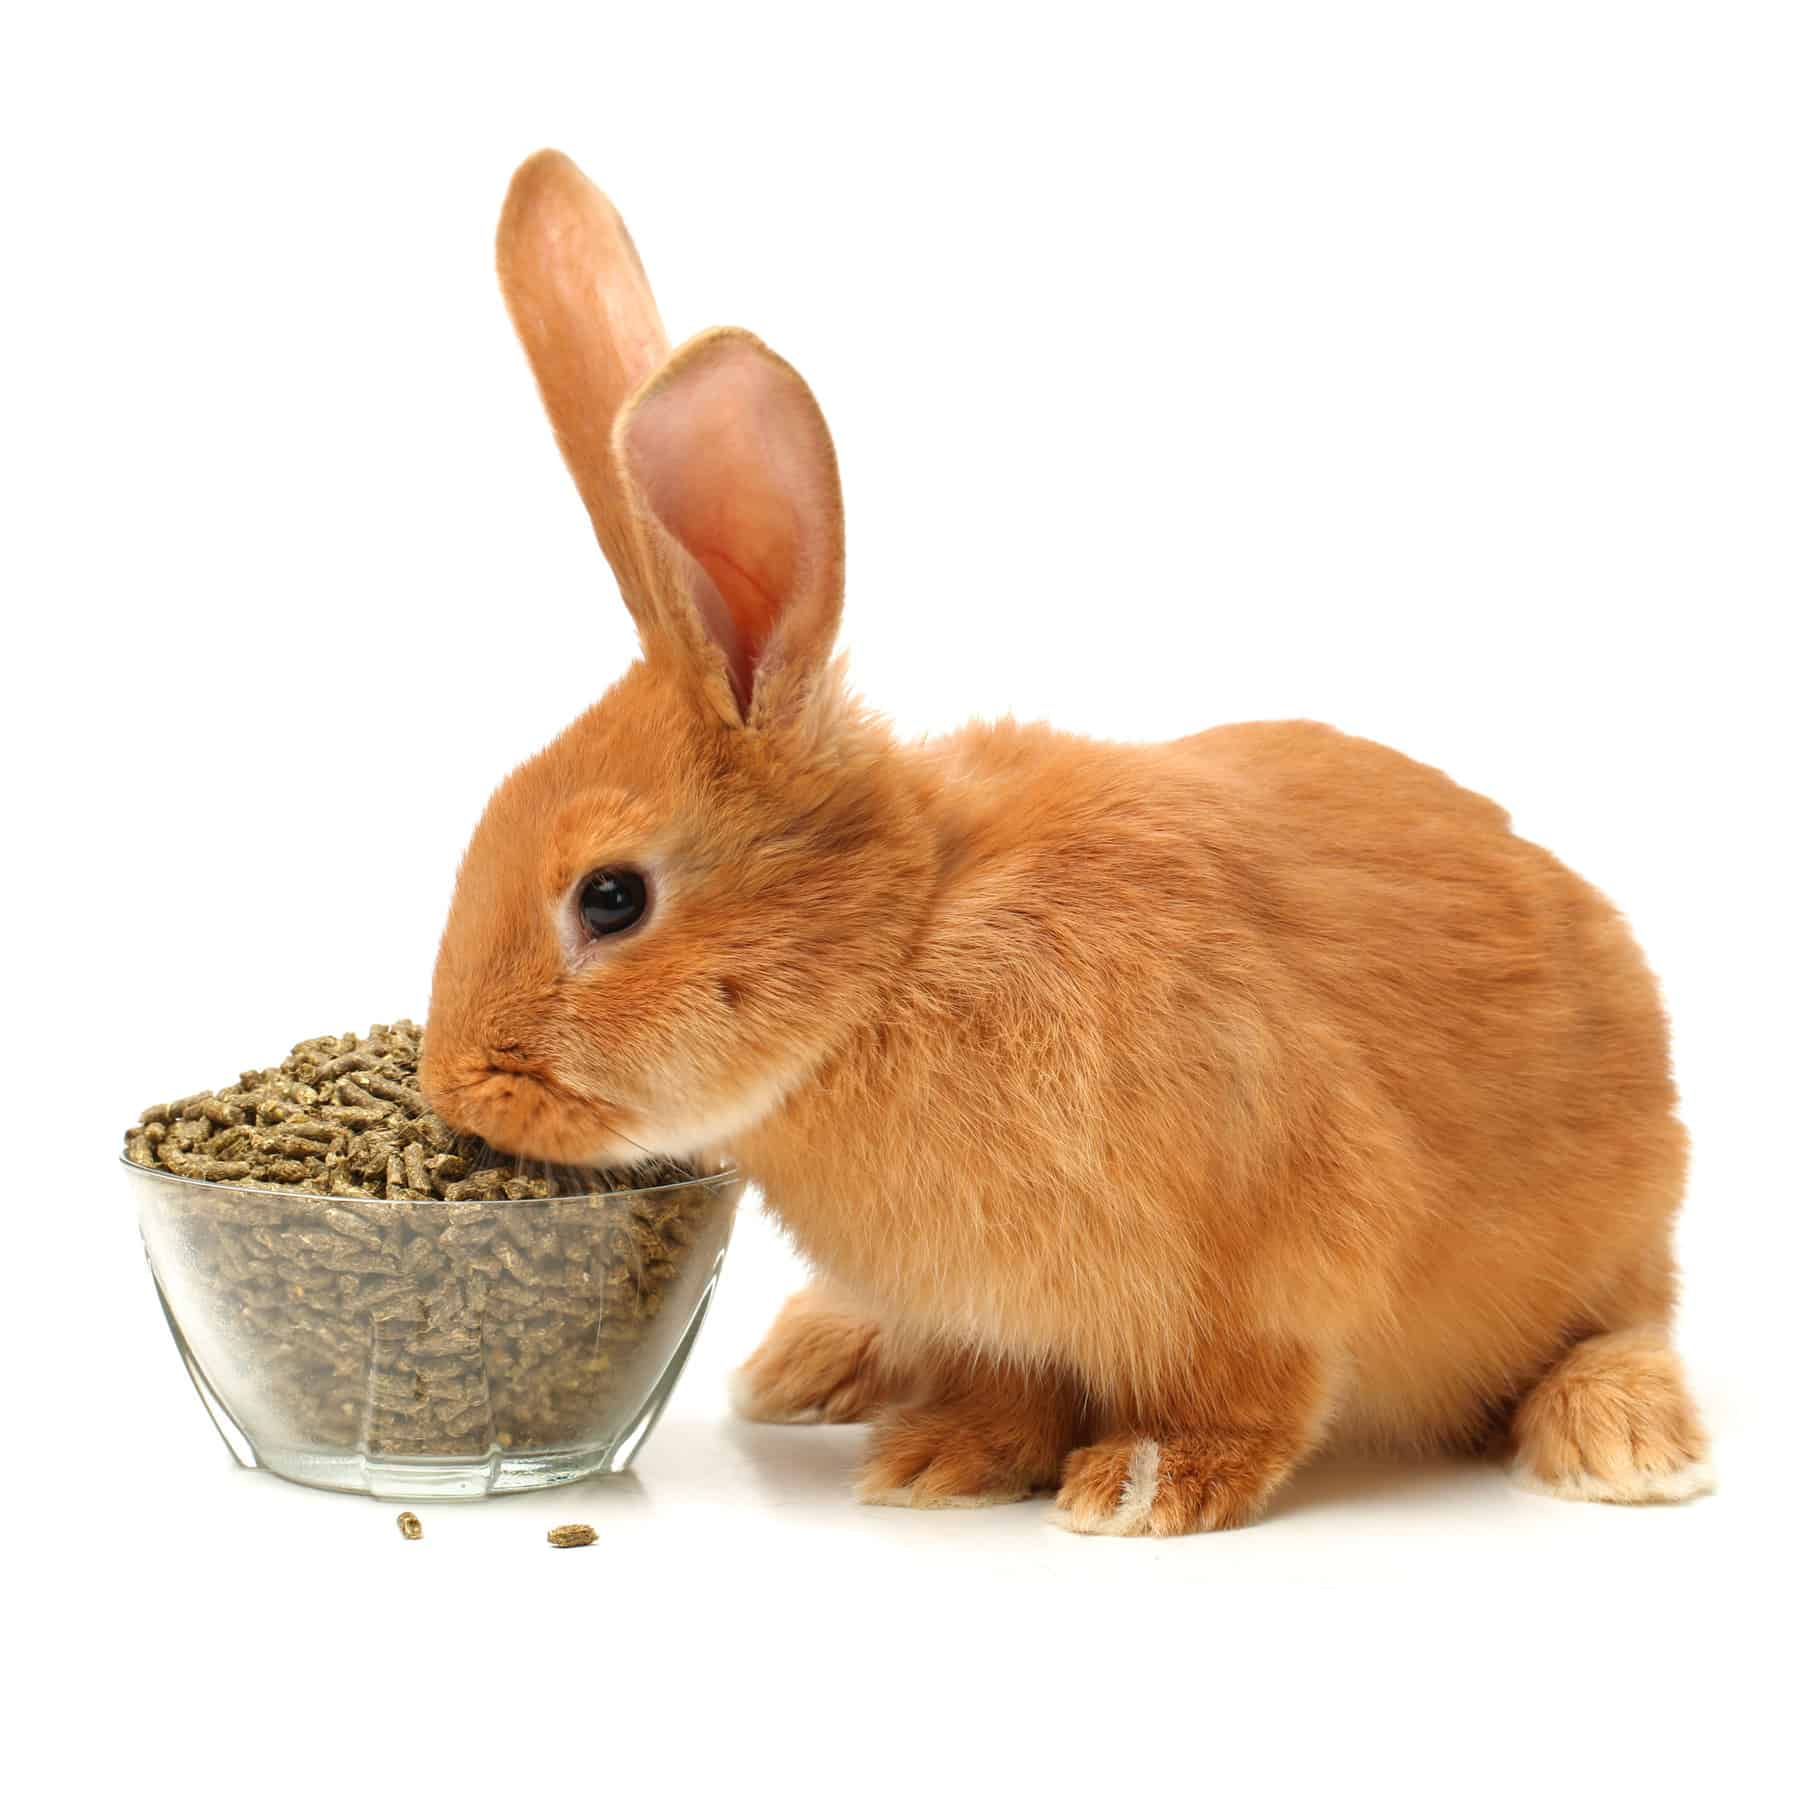 orange bunny eating out of a bowl.